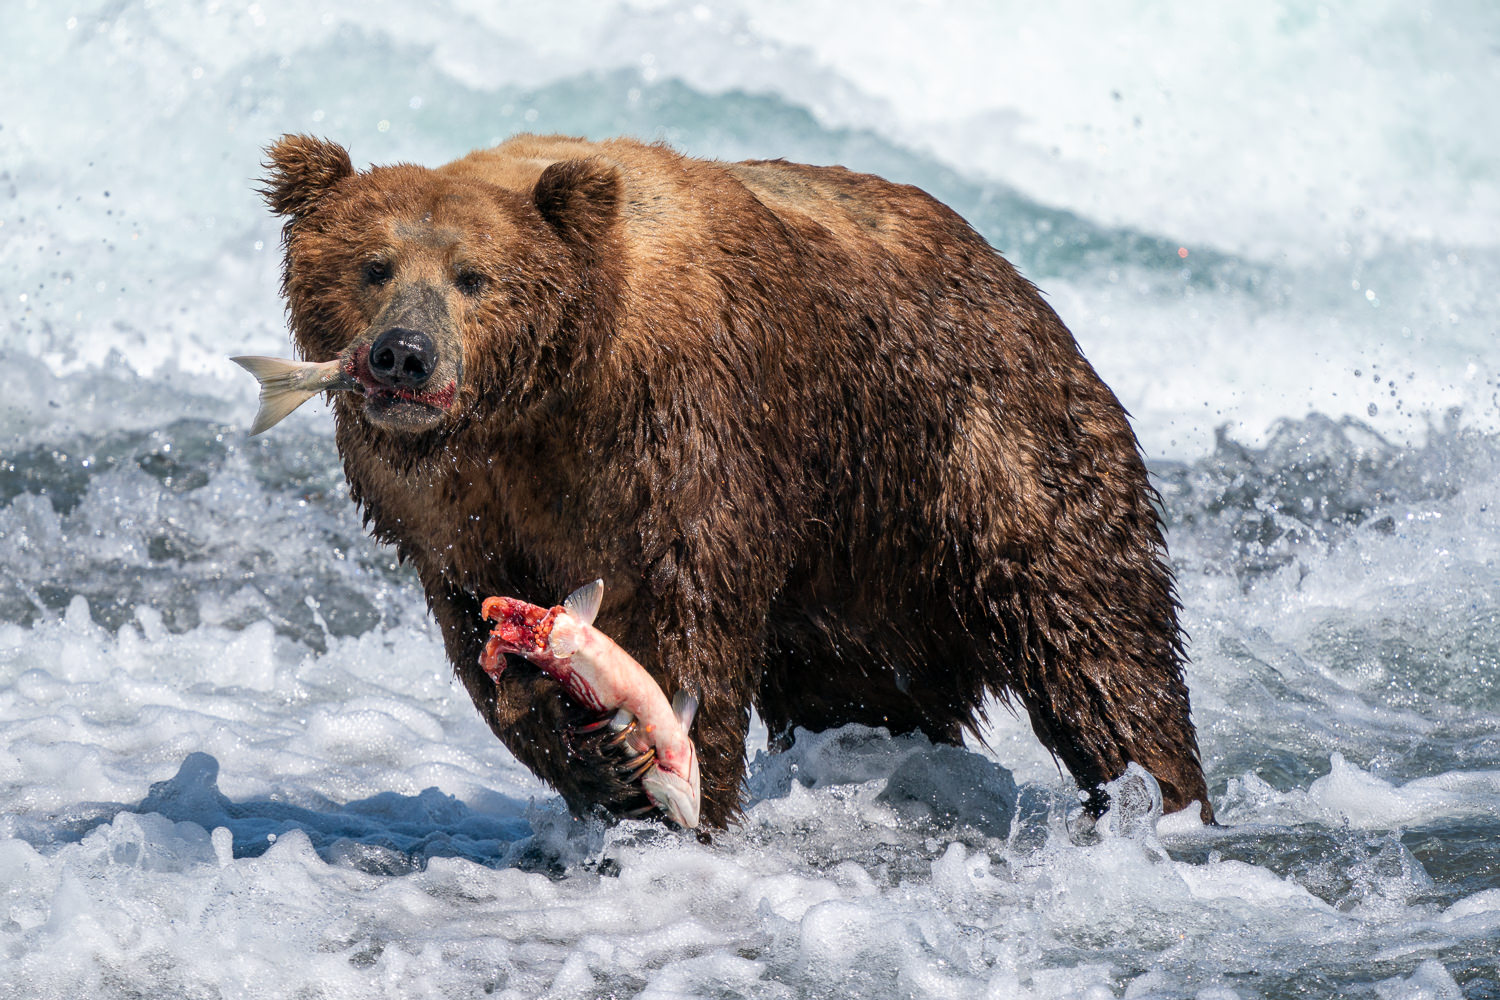 Brown Bear Eating Salmon Chum at McNeil River Sanctuary in Alaska Taken with Sony a9 w/ 200-600 Lens